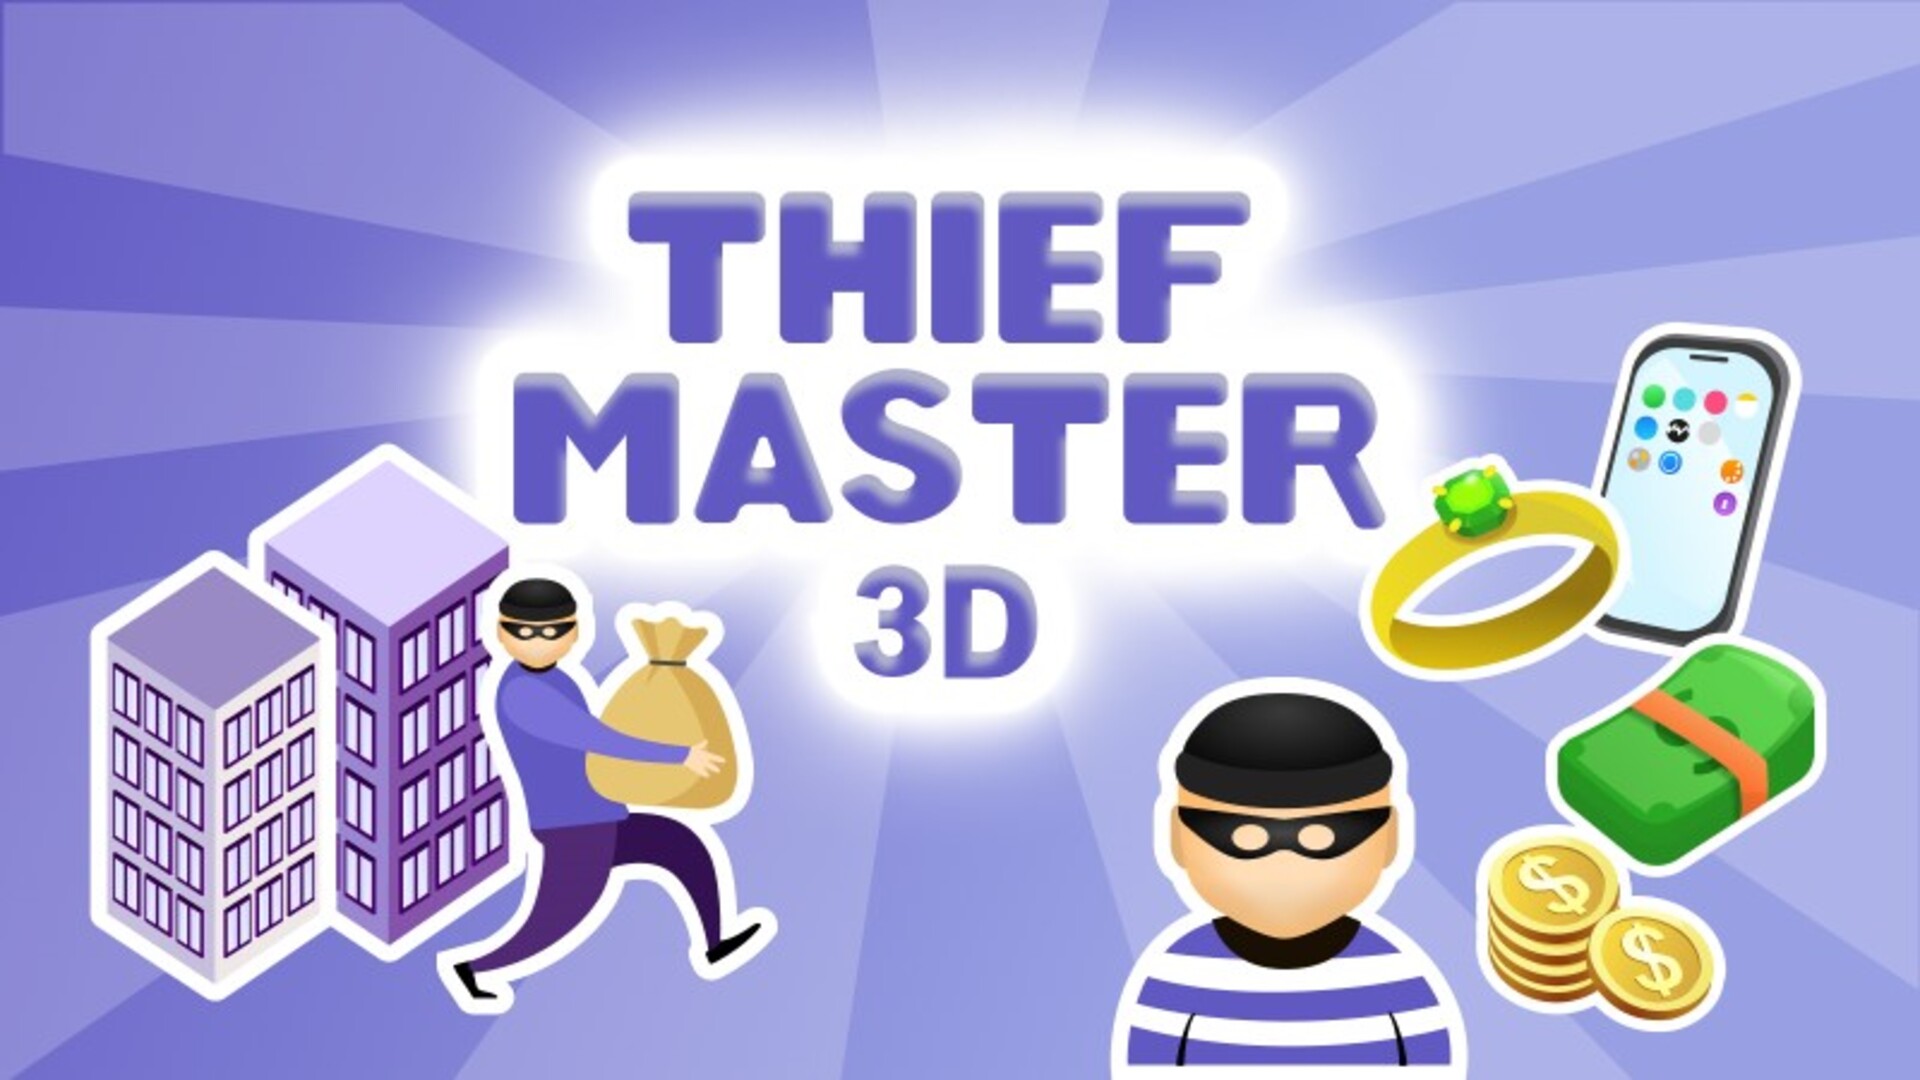 Theif Master 3D